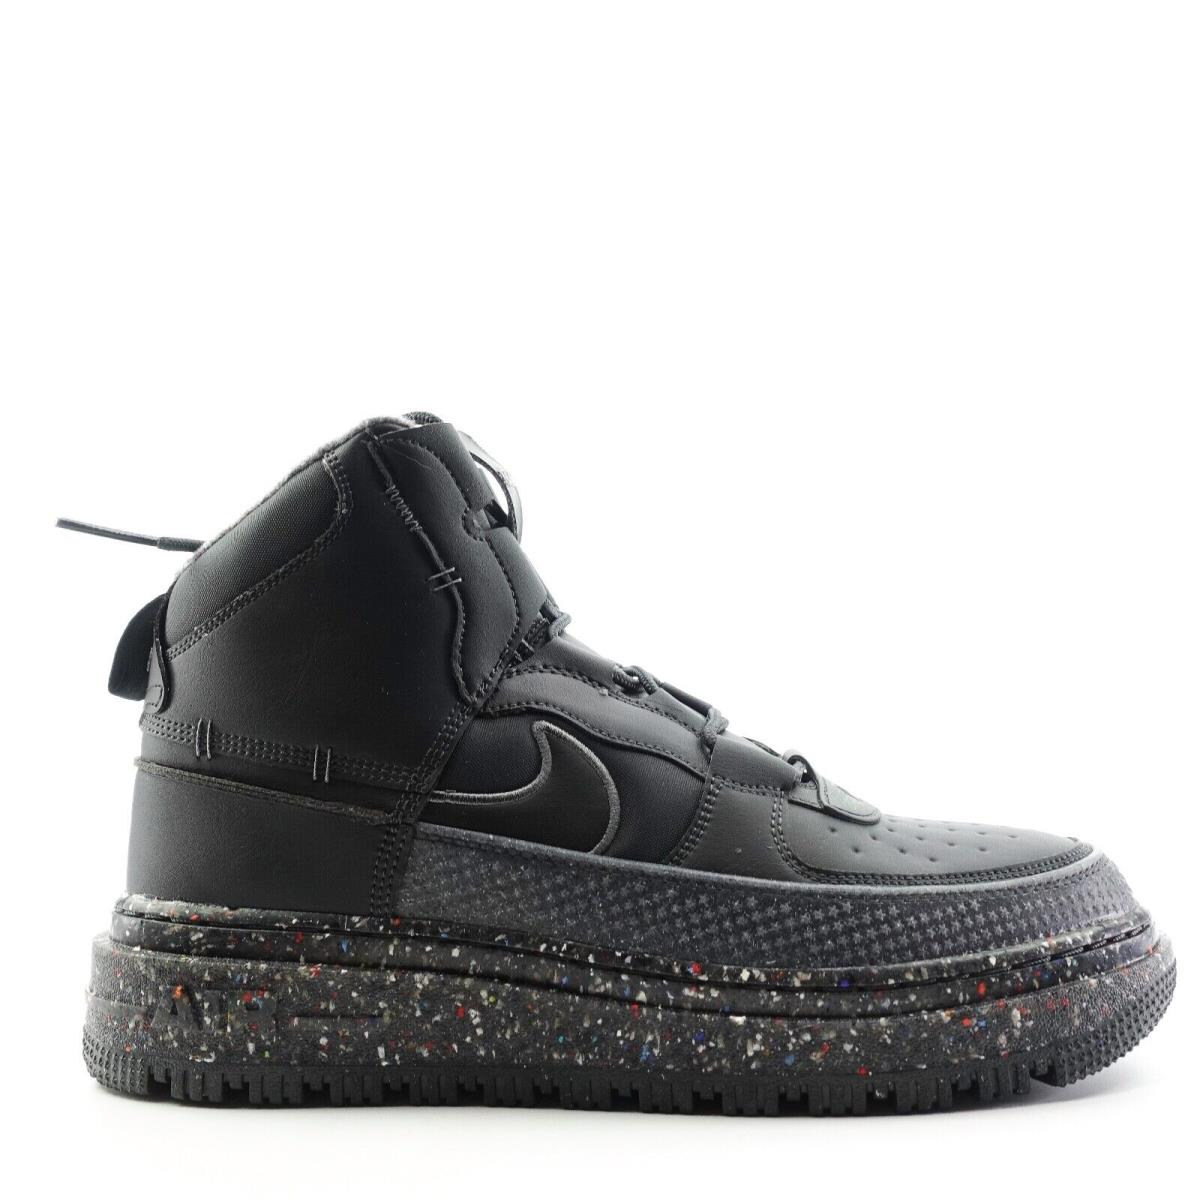 Nike Air Force 1 Boot NN Dark Smoke Grey Crater Shoes DD0747-001 Men s Size 11